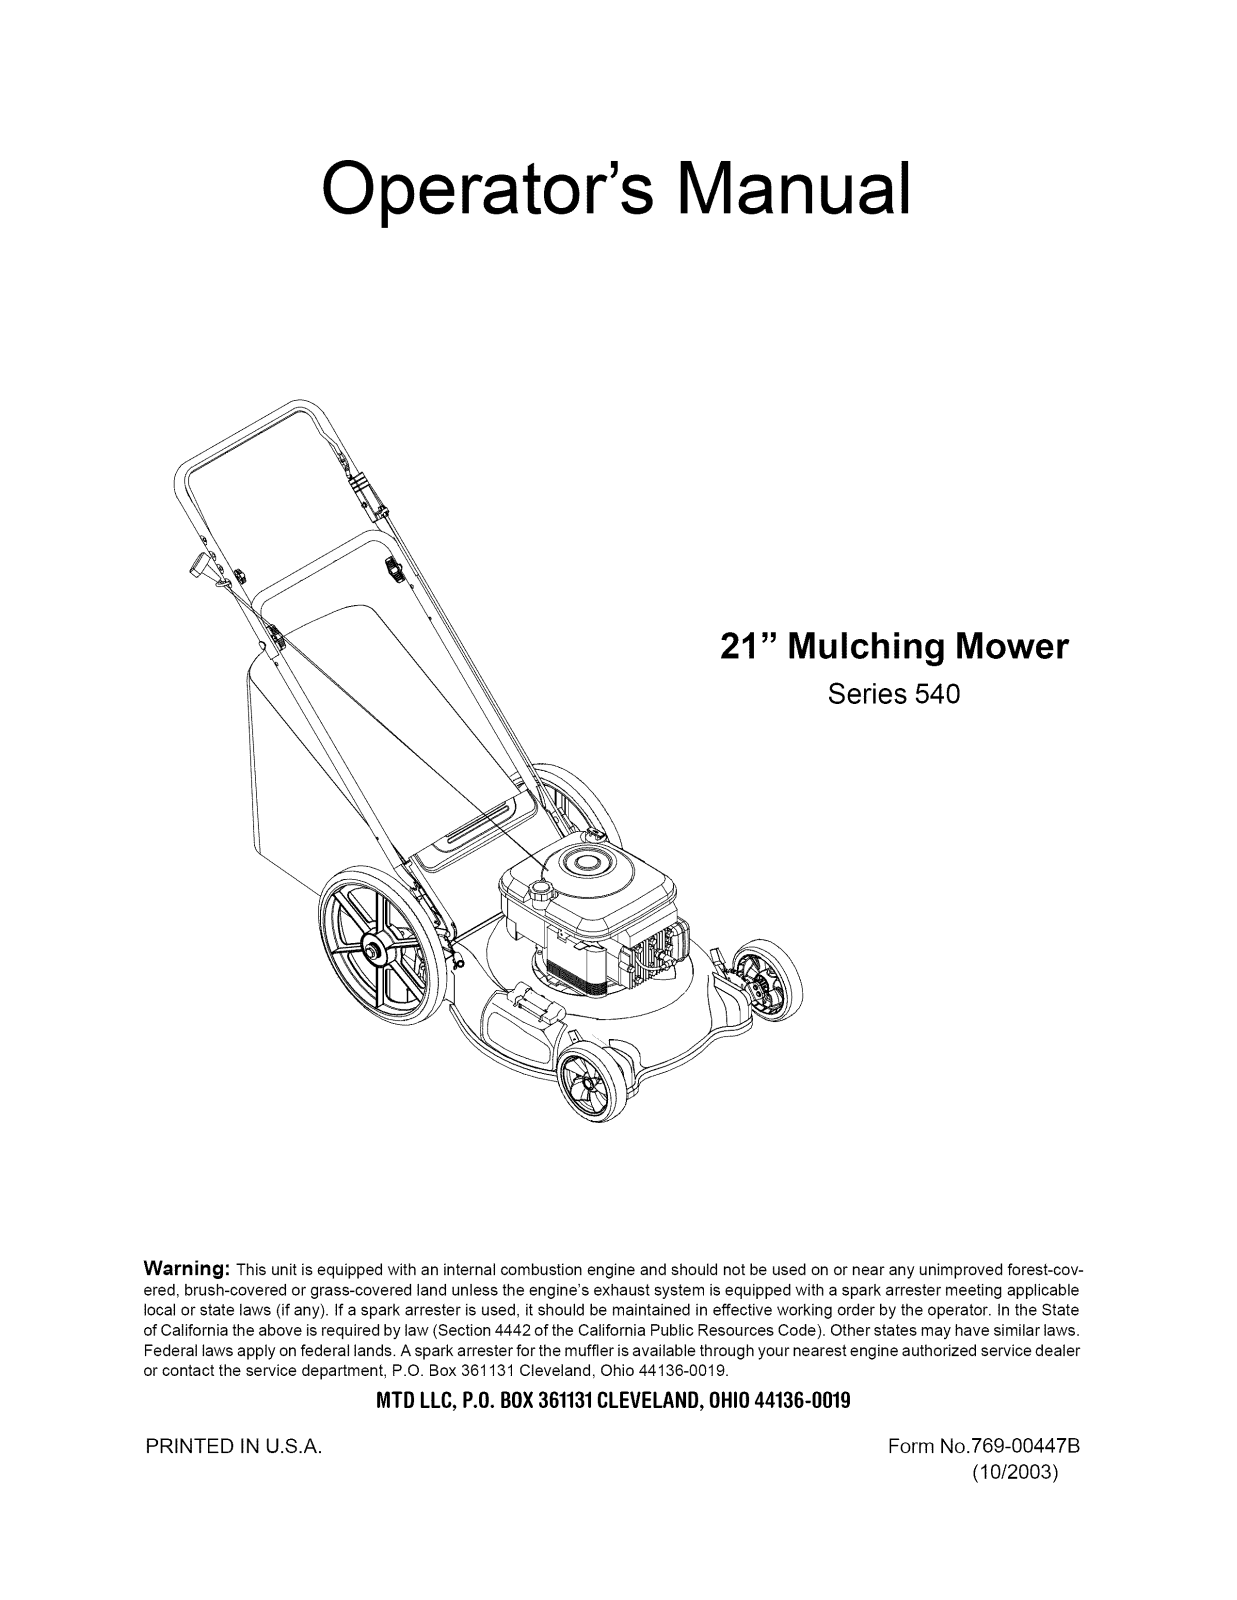 MTD 11A-549R731, 11A-549G729, 11A-543C700 Owner’s Manual